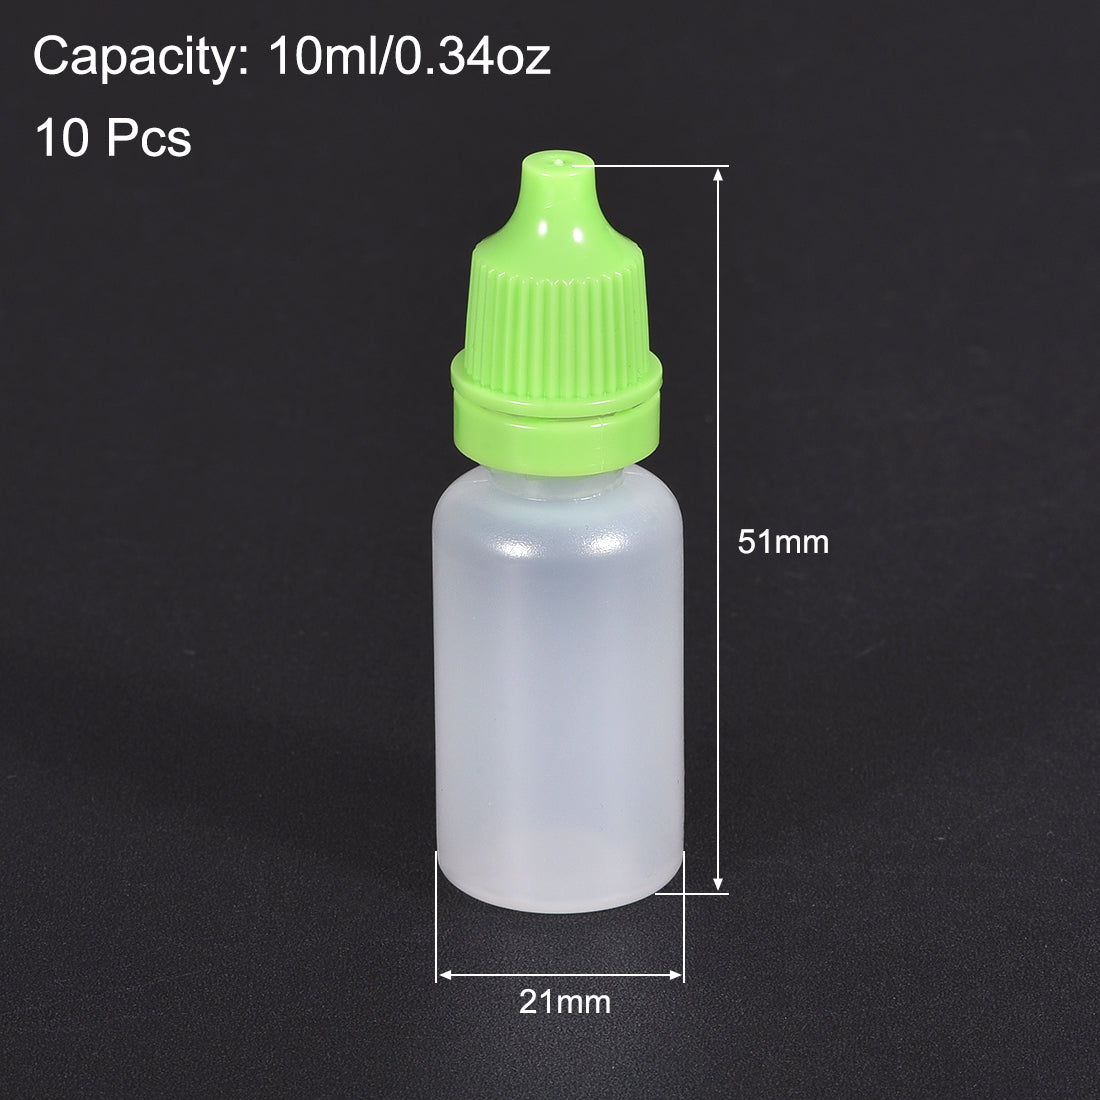 uxcell Uxcell 10ml/0.34 oz Empty Squeezable Dropper Bottle Green 10pcs